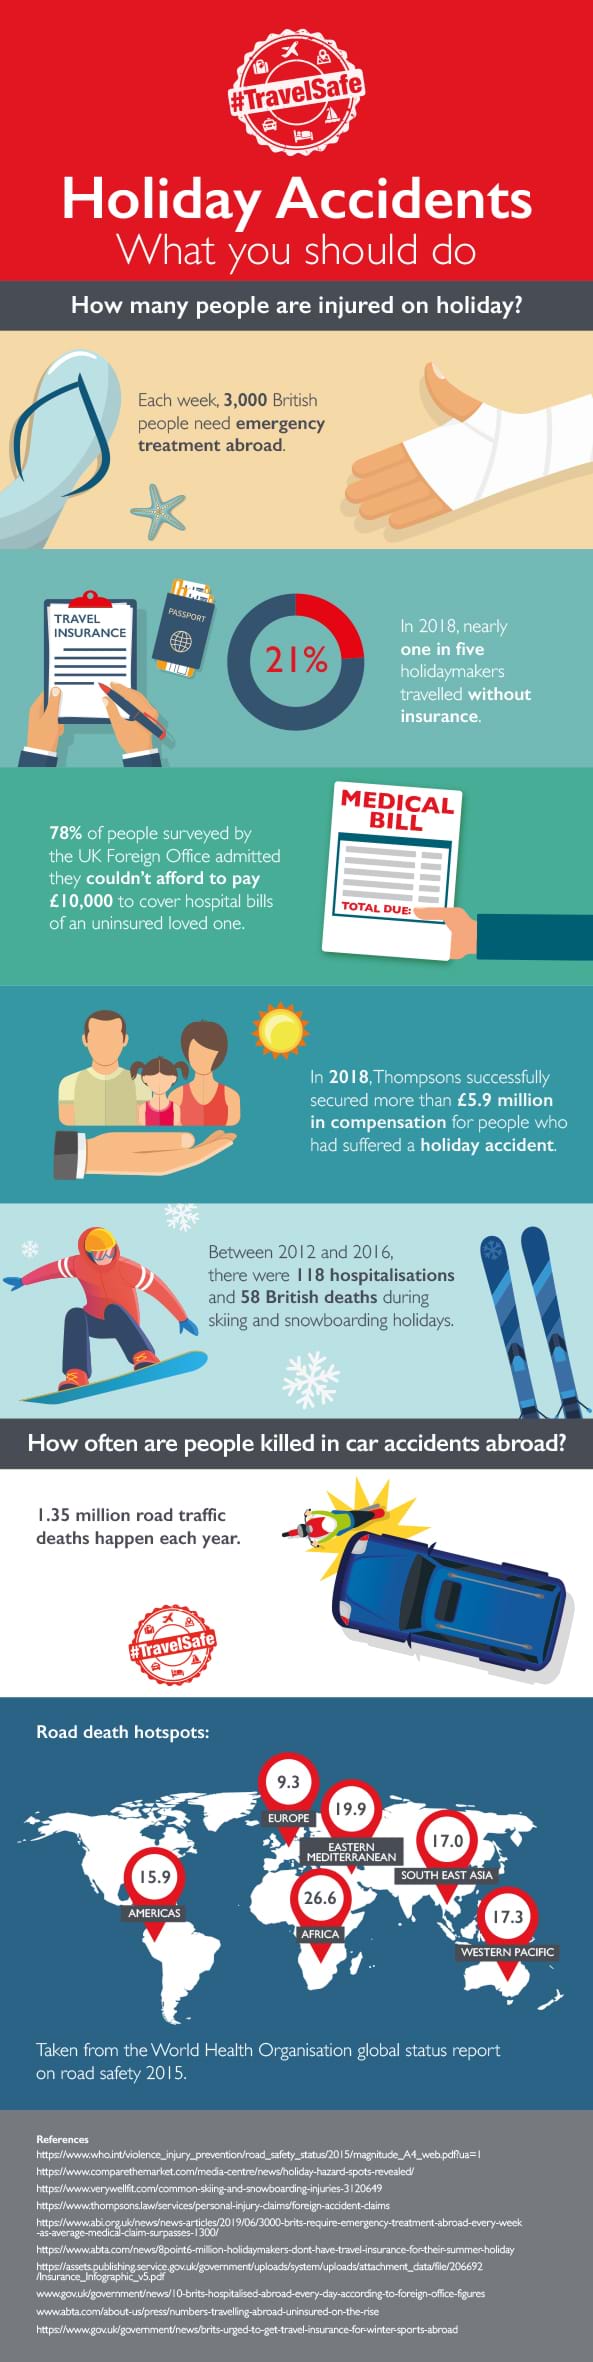 An infographic illustrating various statistics about holiday accidents